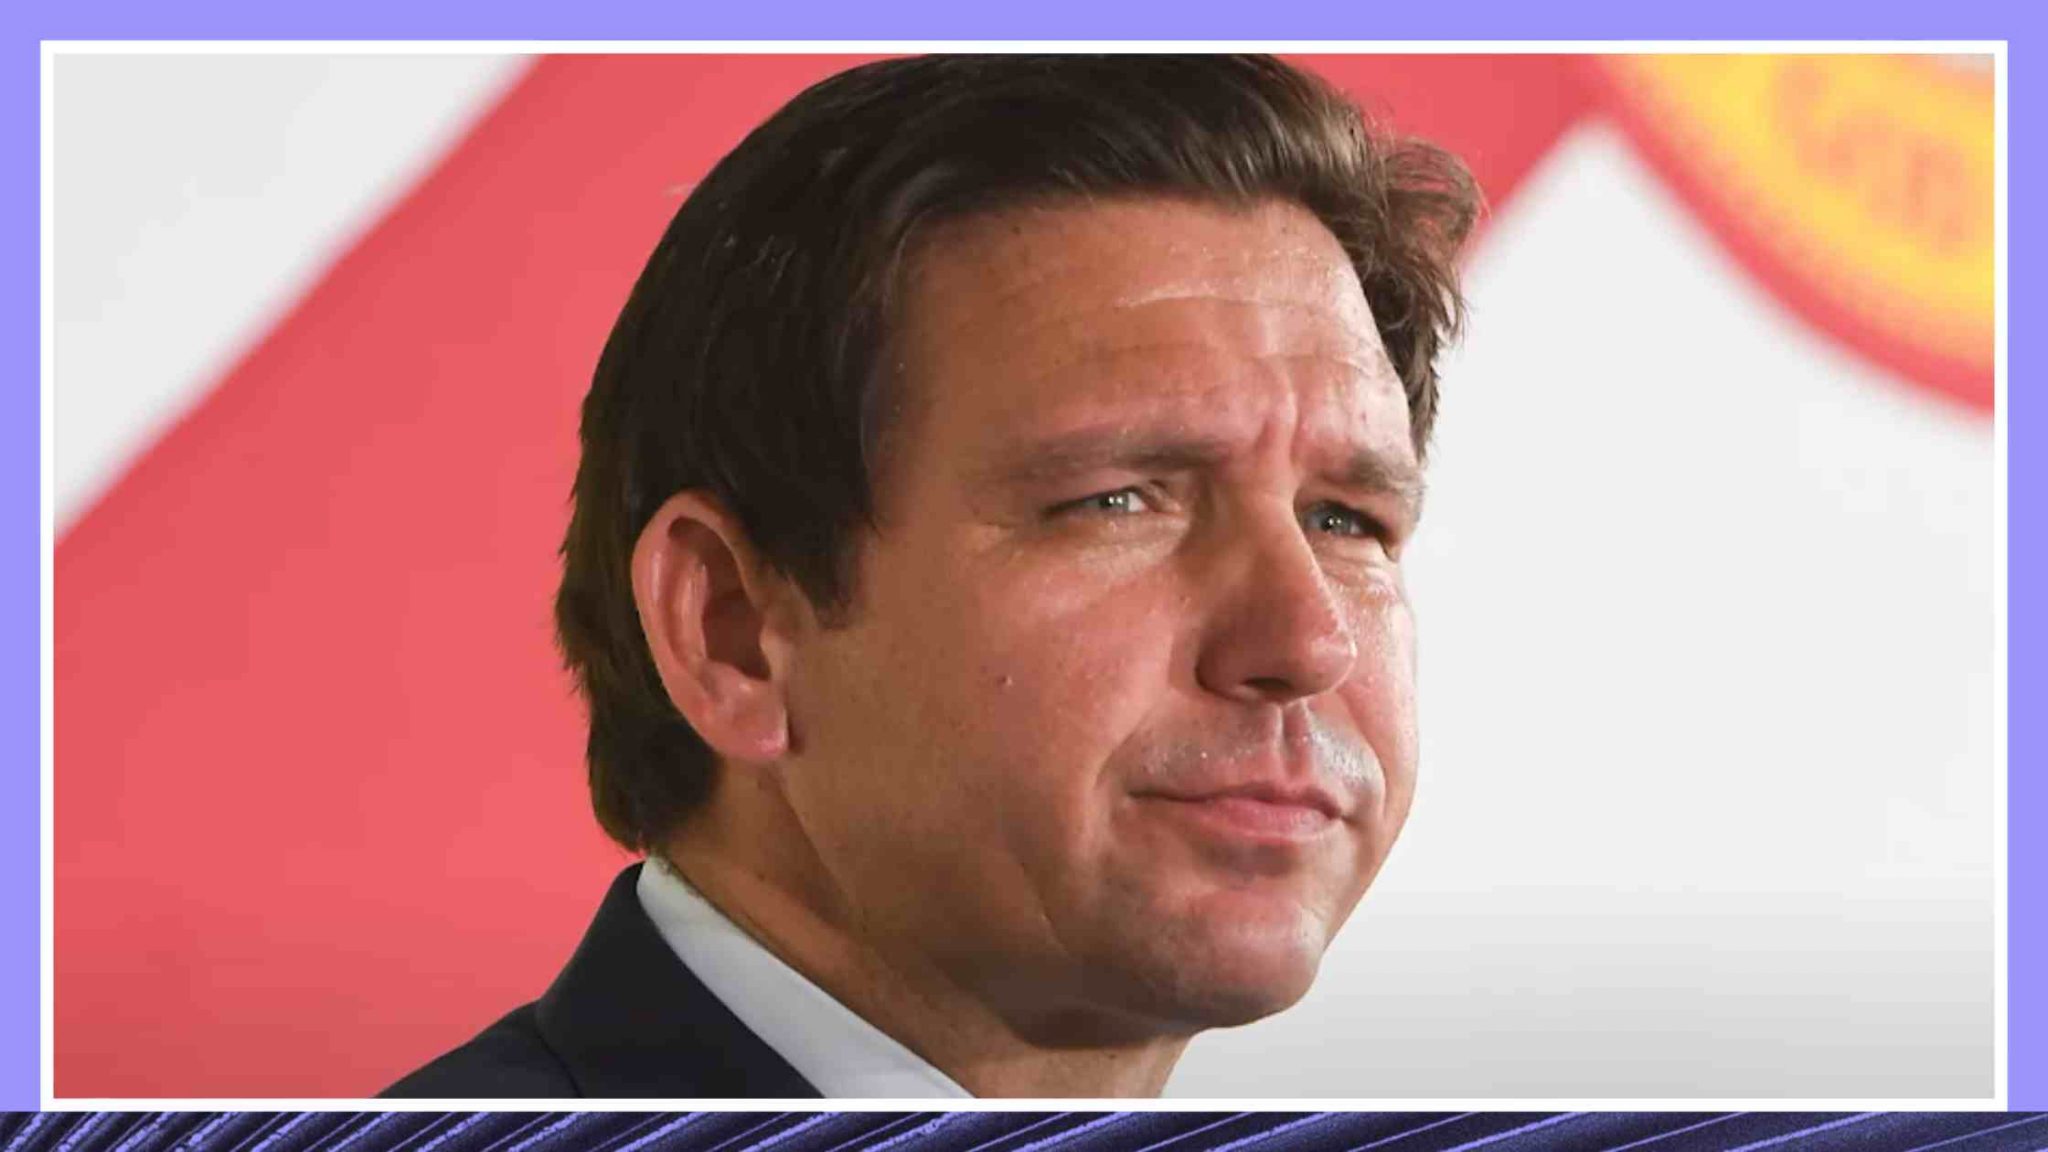 DeSantis: 'People just need to chill out' about potential 2024 face-off between him, Trump